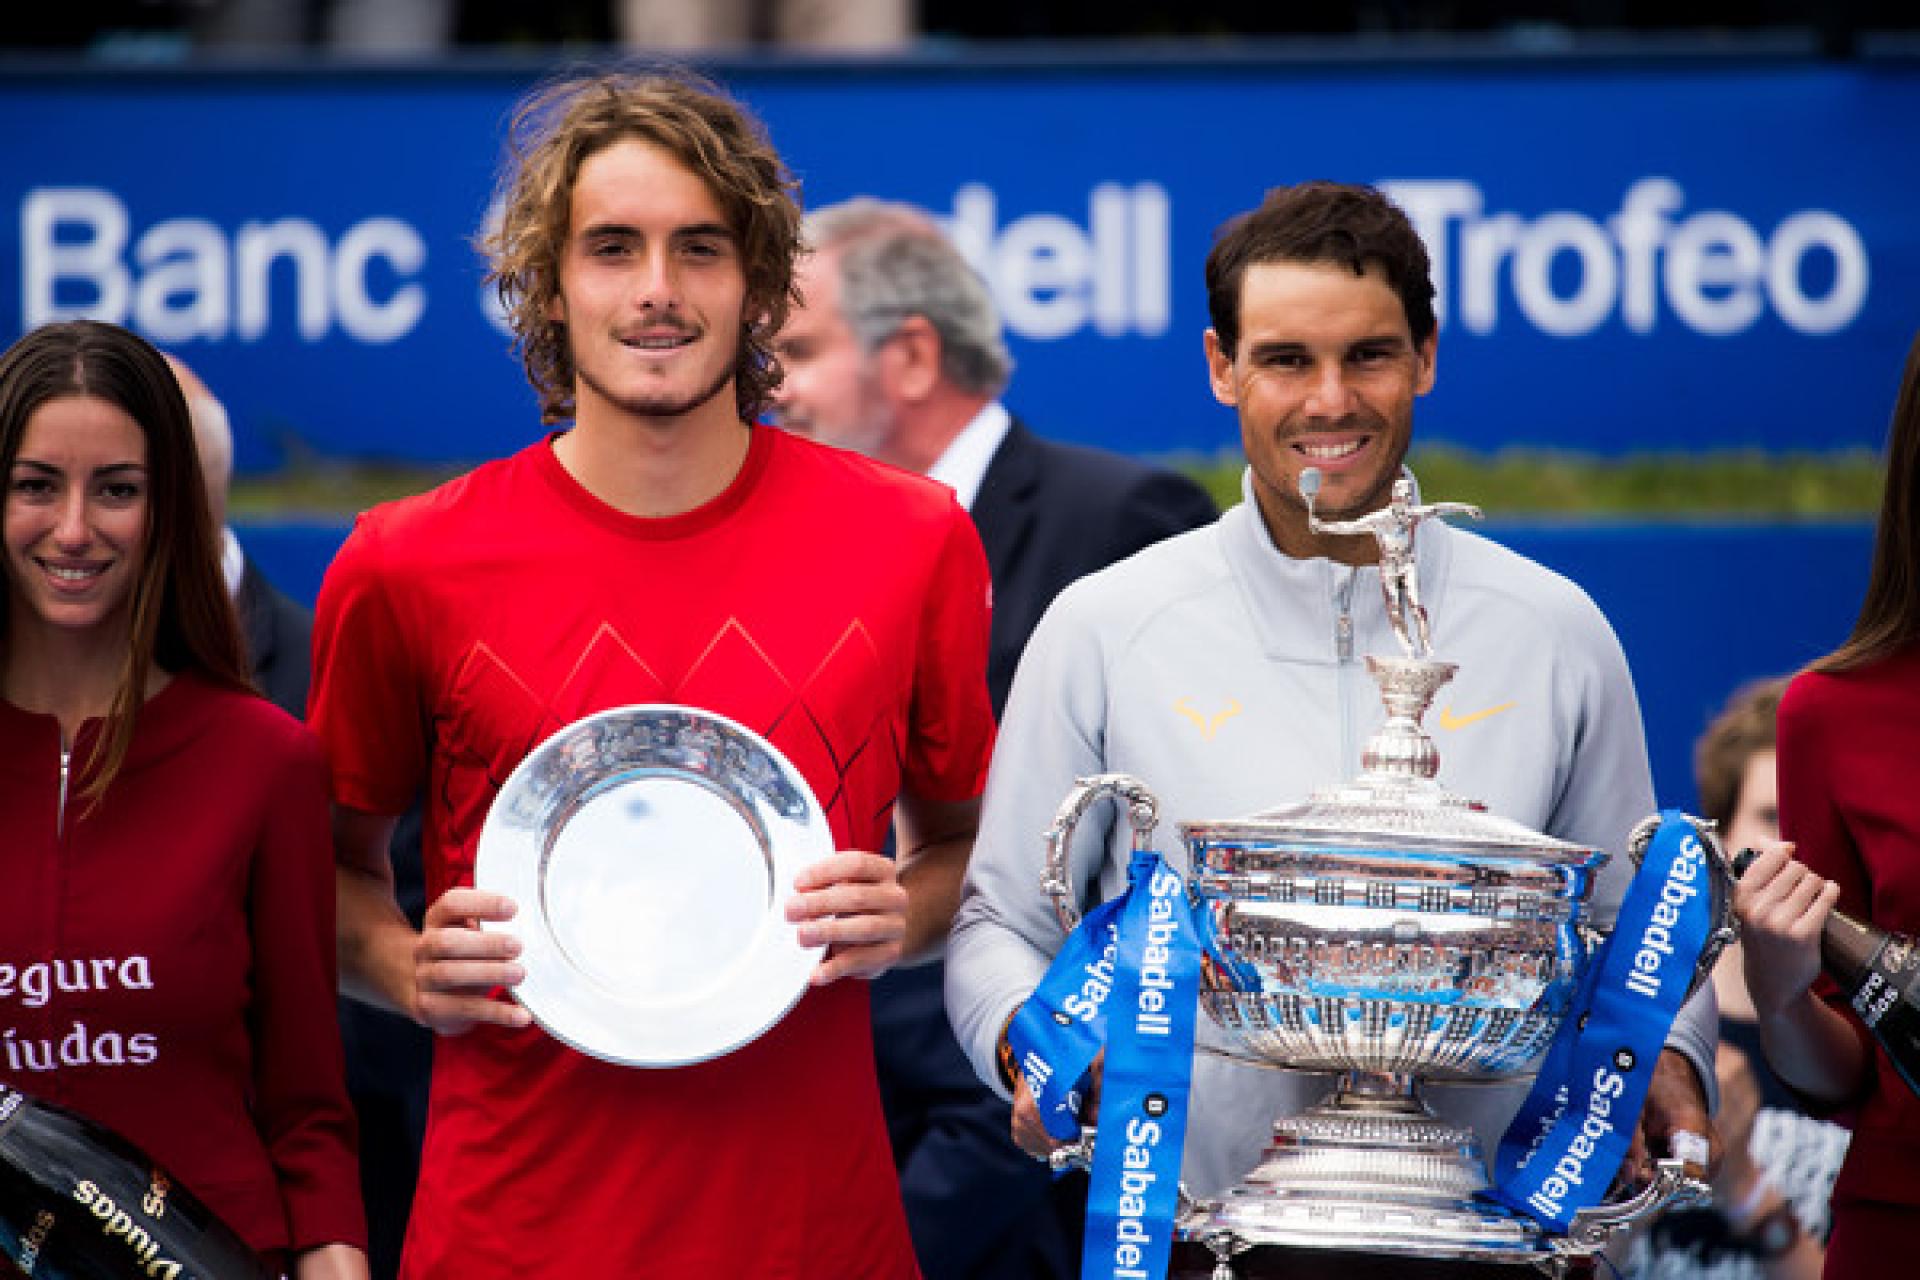 rafael nadal vs stefanos tsitsipas what happened in their first match